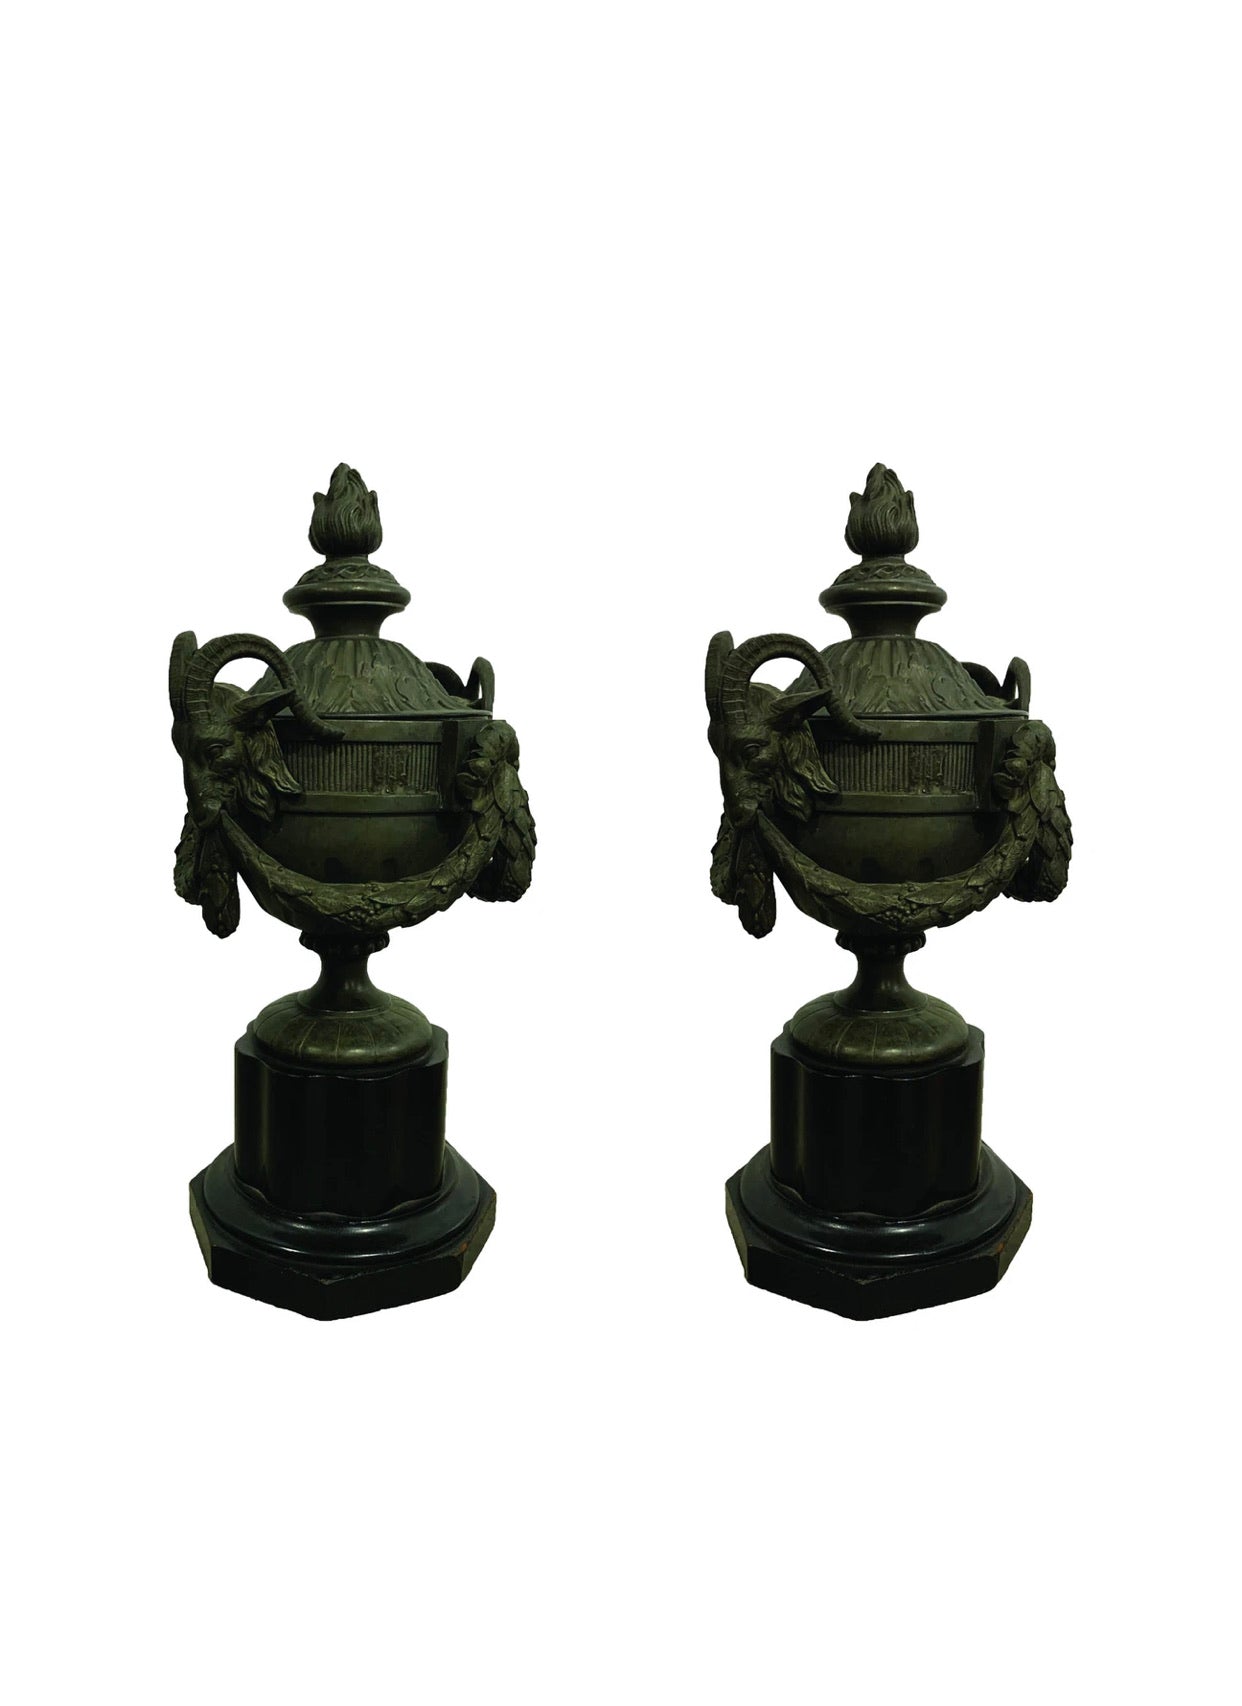 PAIR OF 19TH CENTURY FRENCH LE GRAND TOUR BRONZE URNS ON PAINTED WOOD BASES - Home - Libertine